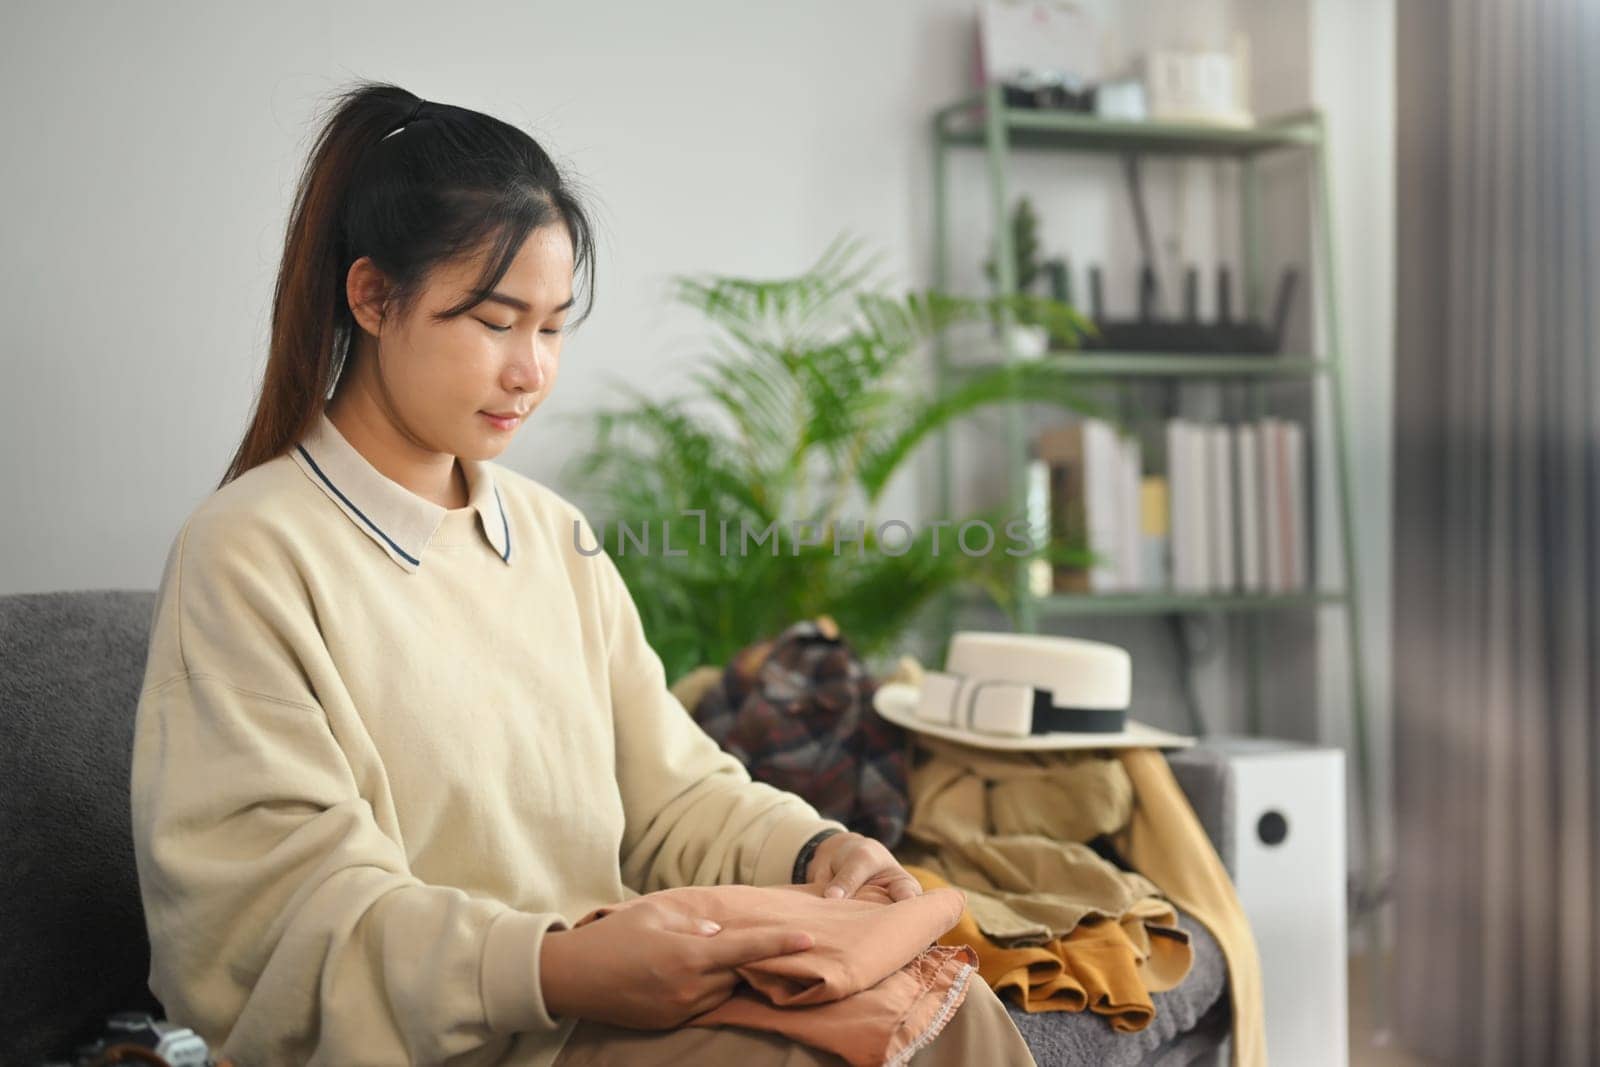 Smiling young woman sitting in living room packing bags and preparing things for vacations trip.